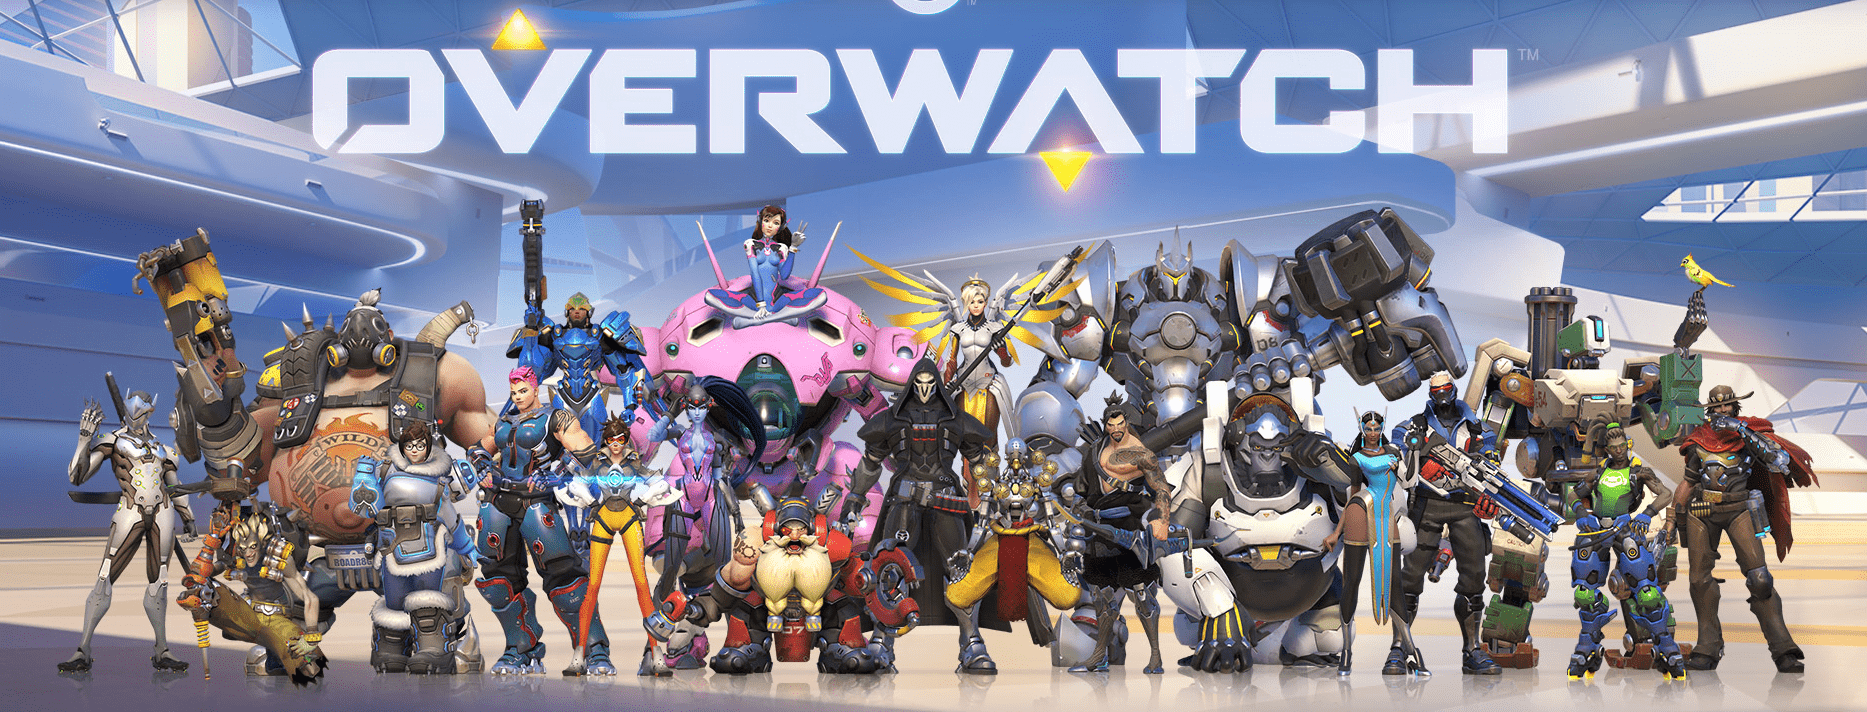 Overwatch Update 2.67 Patch Notes For PS4 Xbox One PC Full Details Here 2019